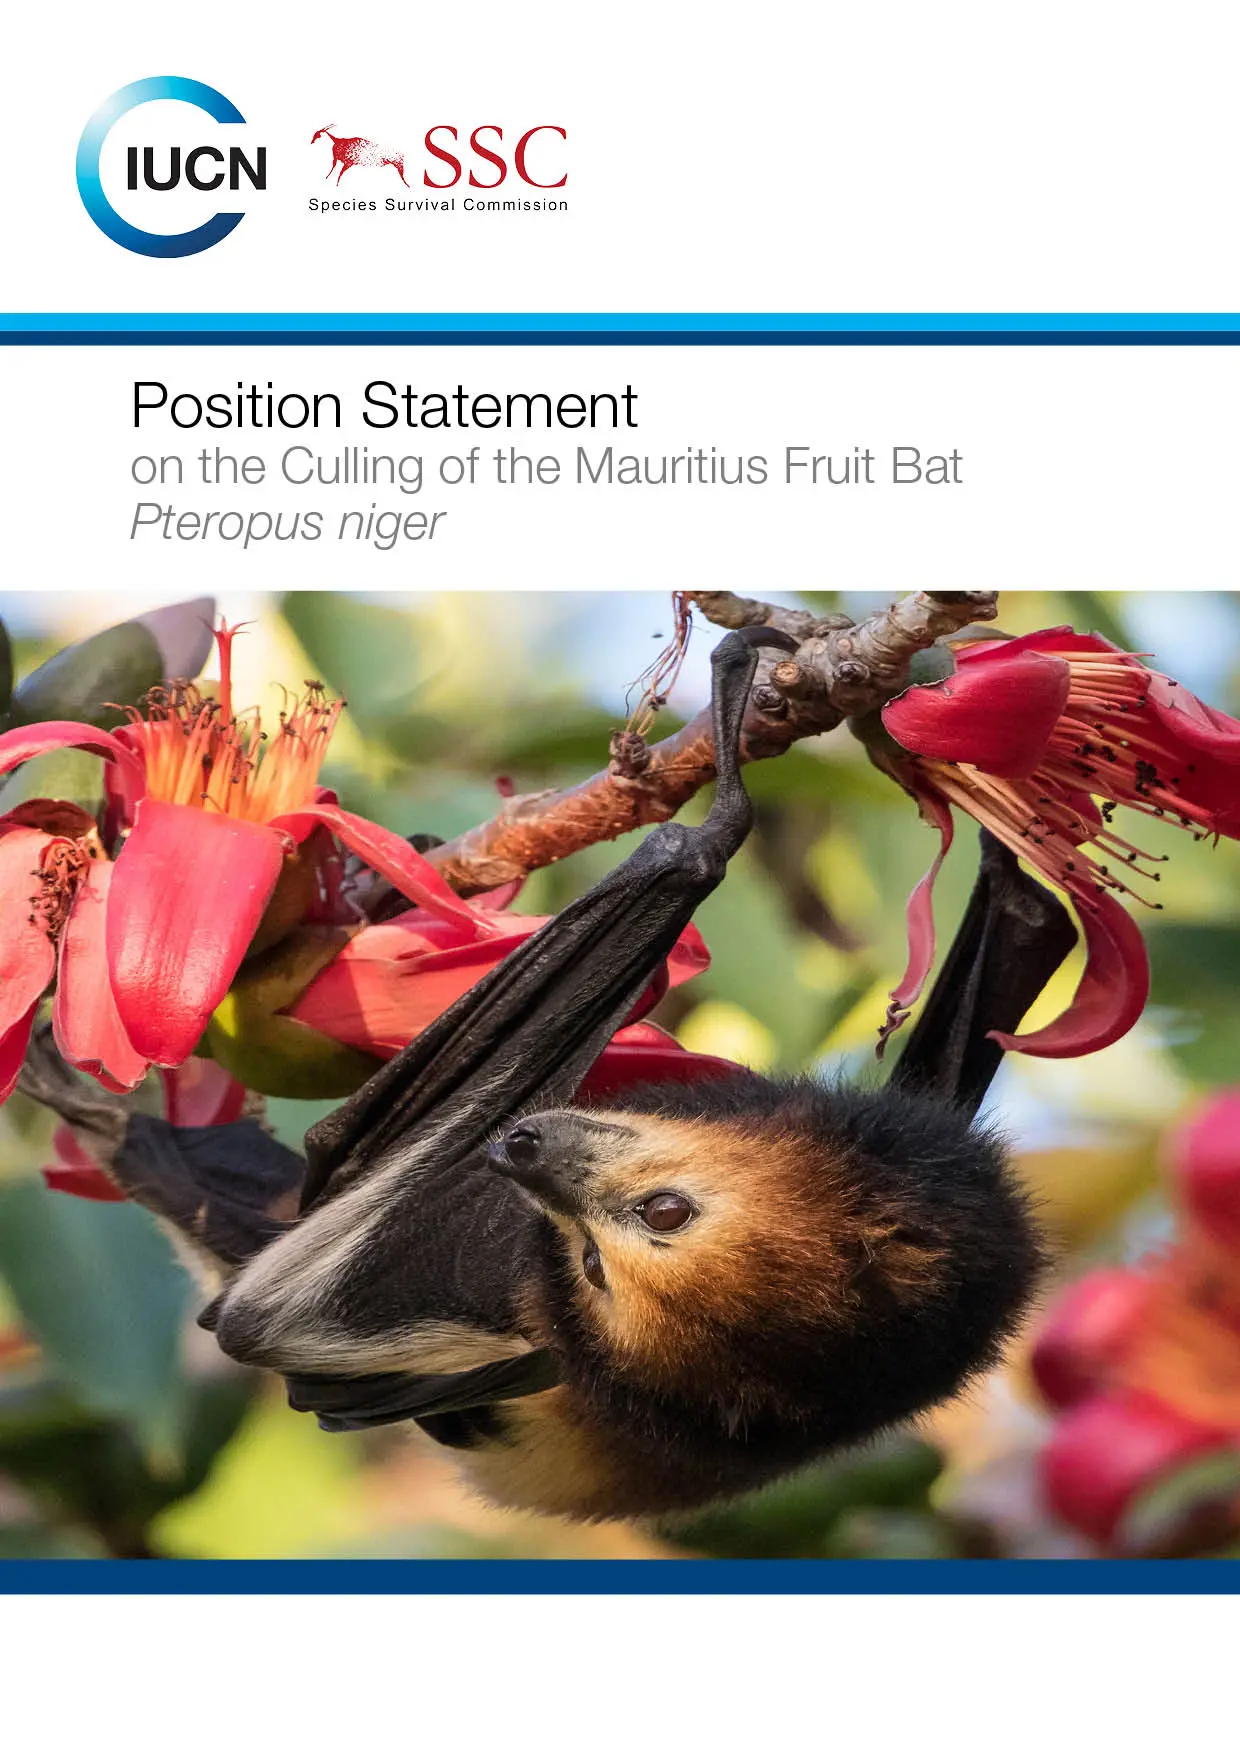 Position Statement on the Culling of the Mauritius Fruit Bat Pteropus niger